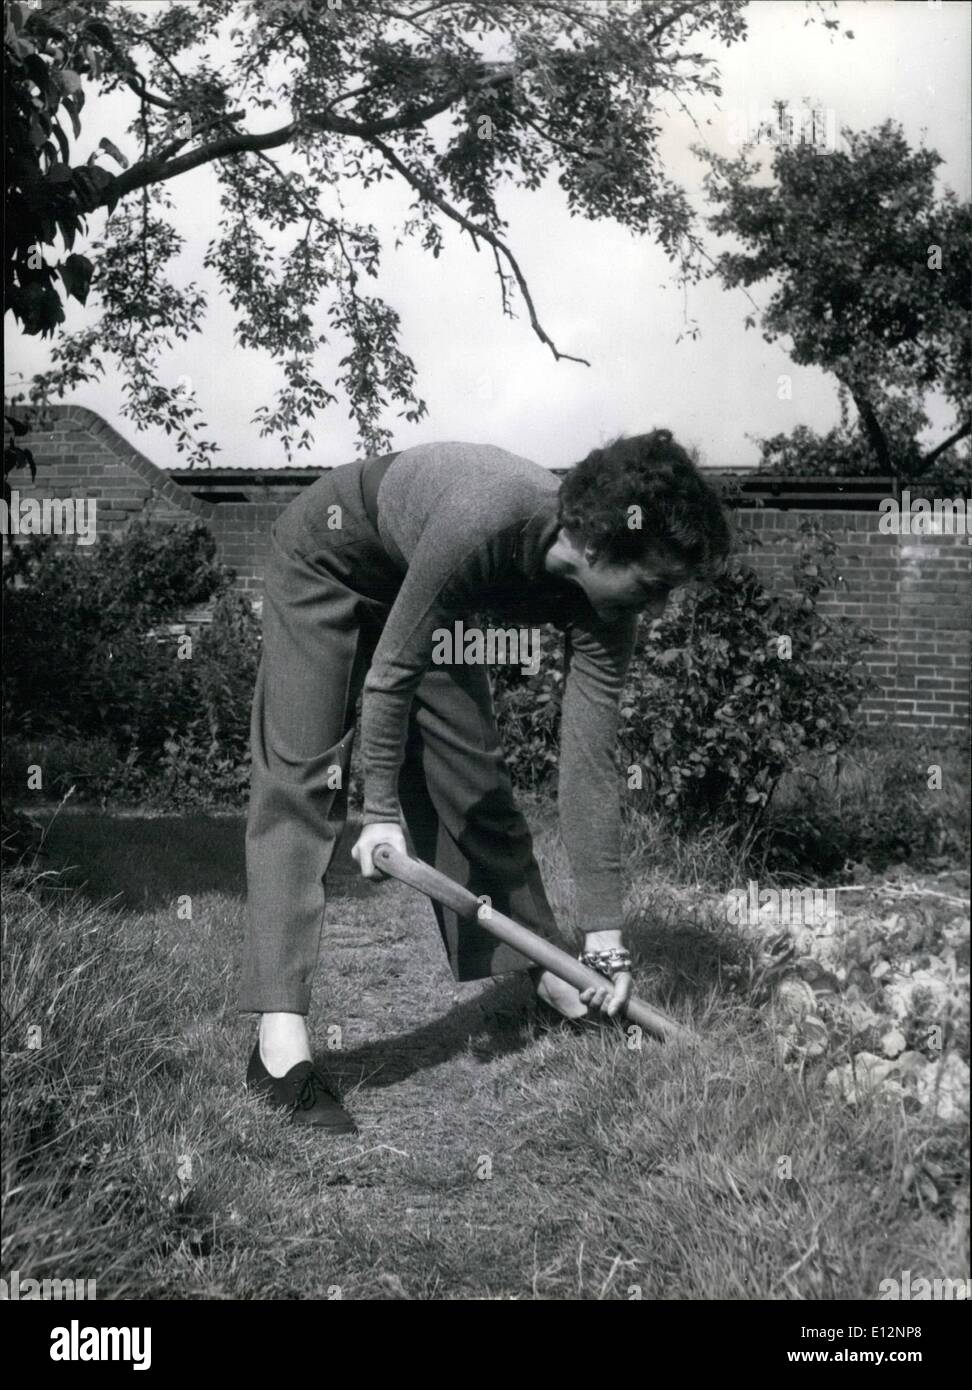 Feb. 24, 2012 - Combine your slimming exercises with everyday tasks Ã¢â‚¬â€œ Eileen Fowler shows us how to use the garden spade Stock Photo